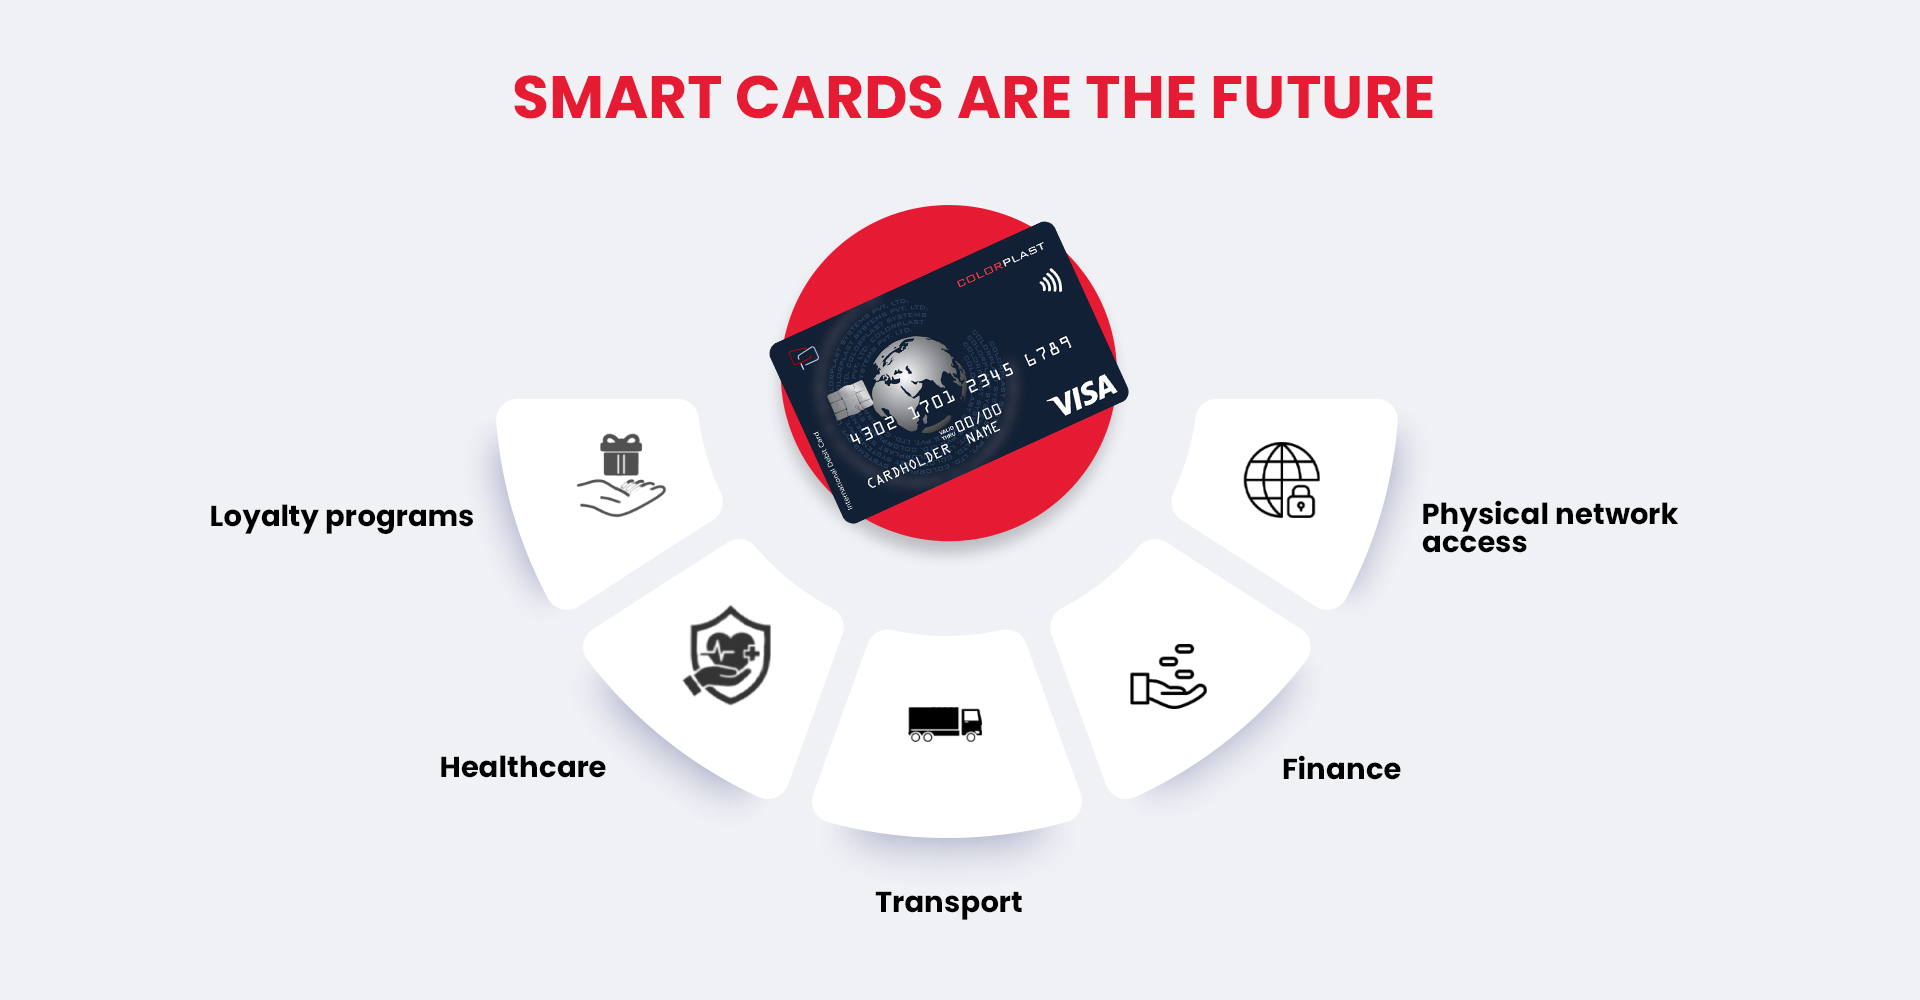 Smart cards are the future